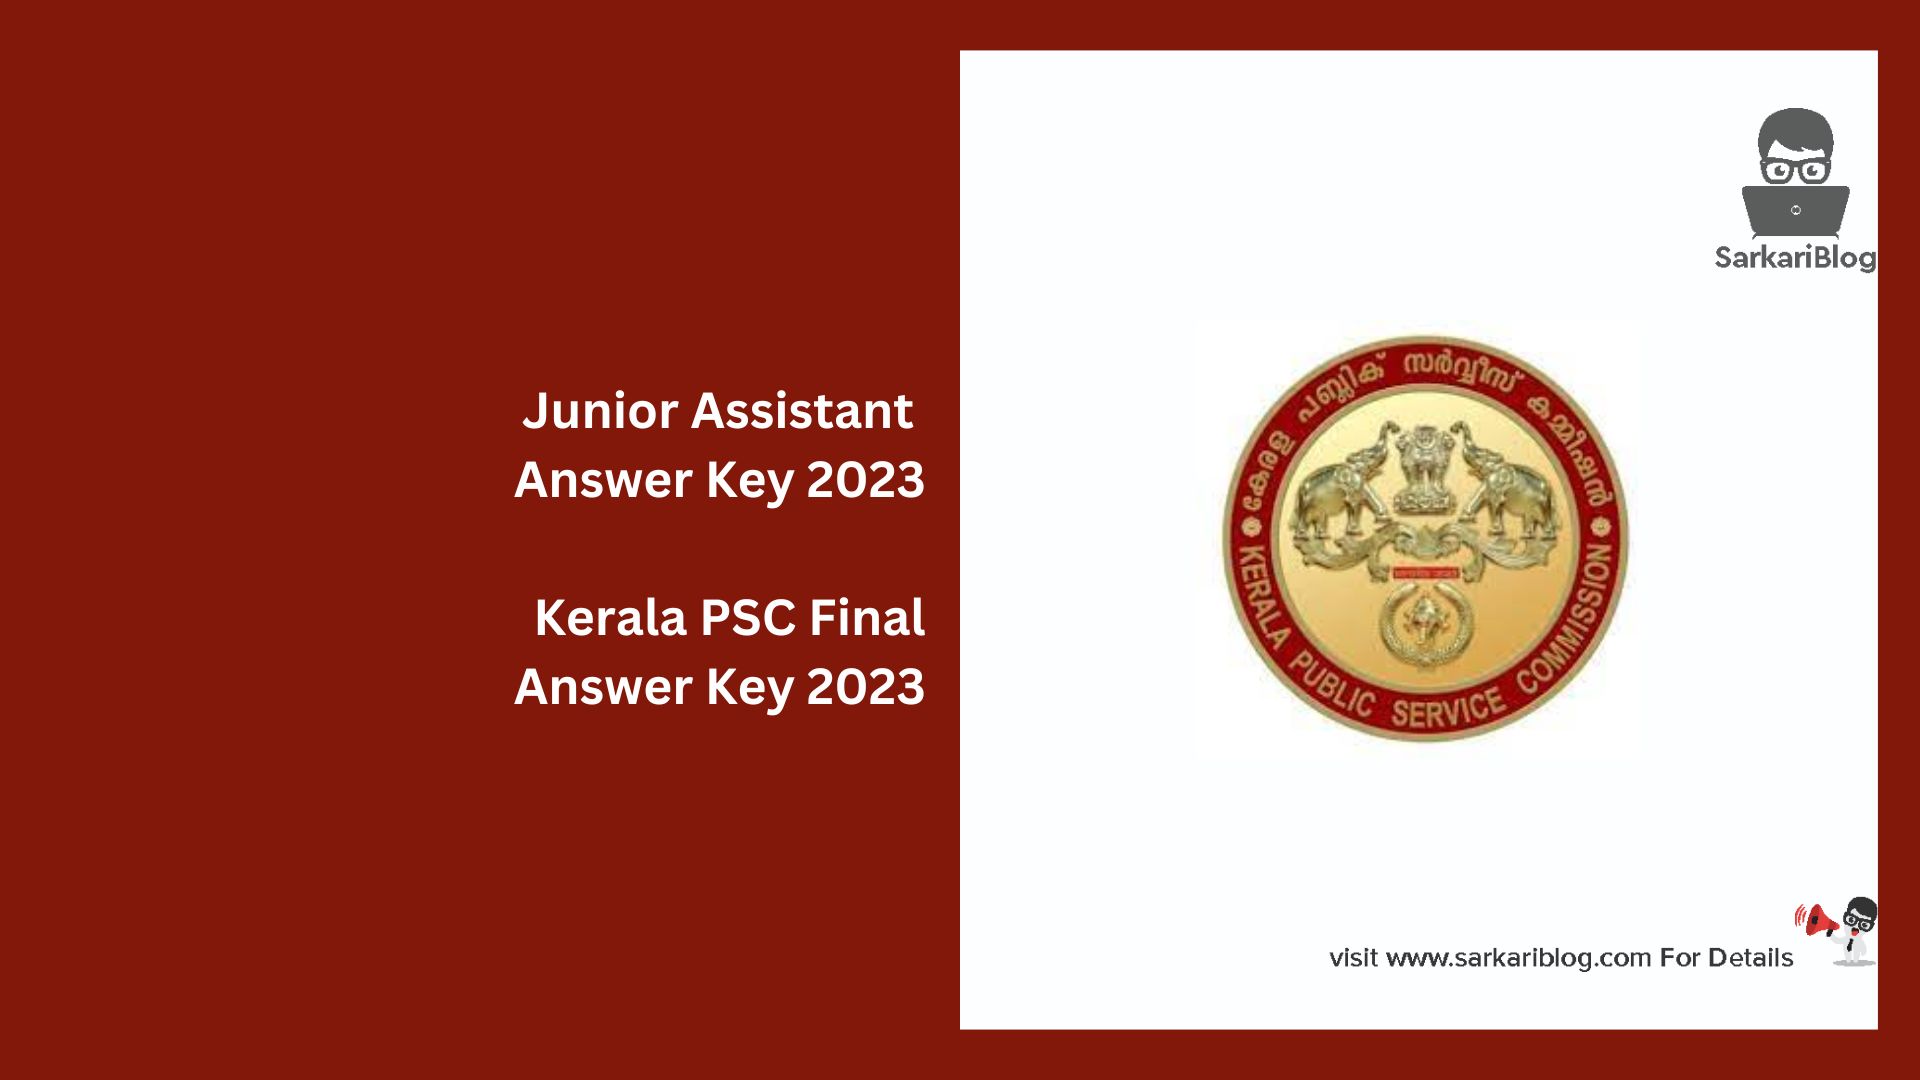 Junior Assistant Answer Key 2023